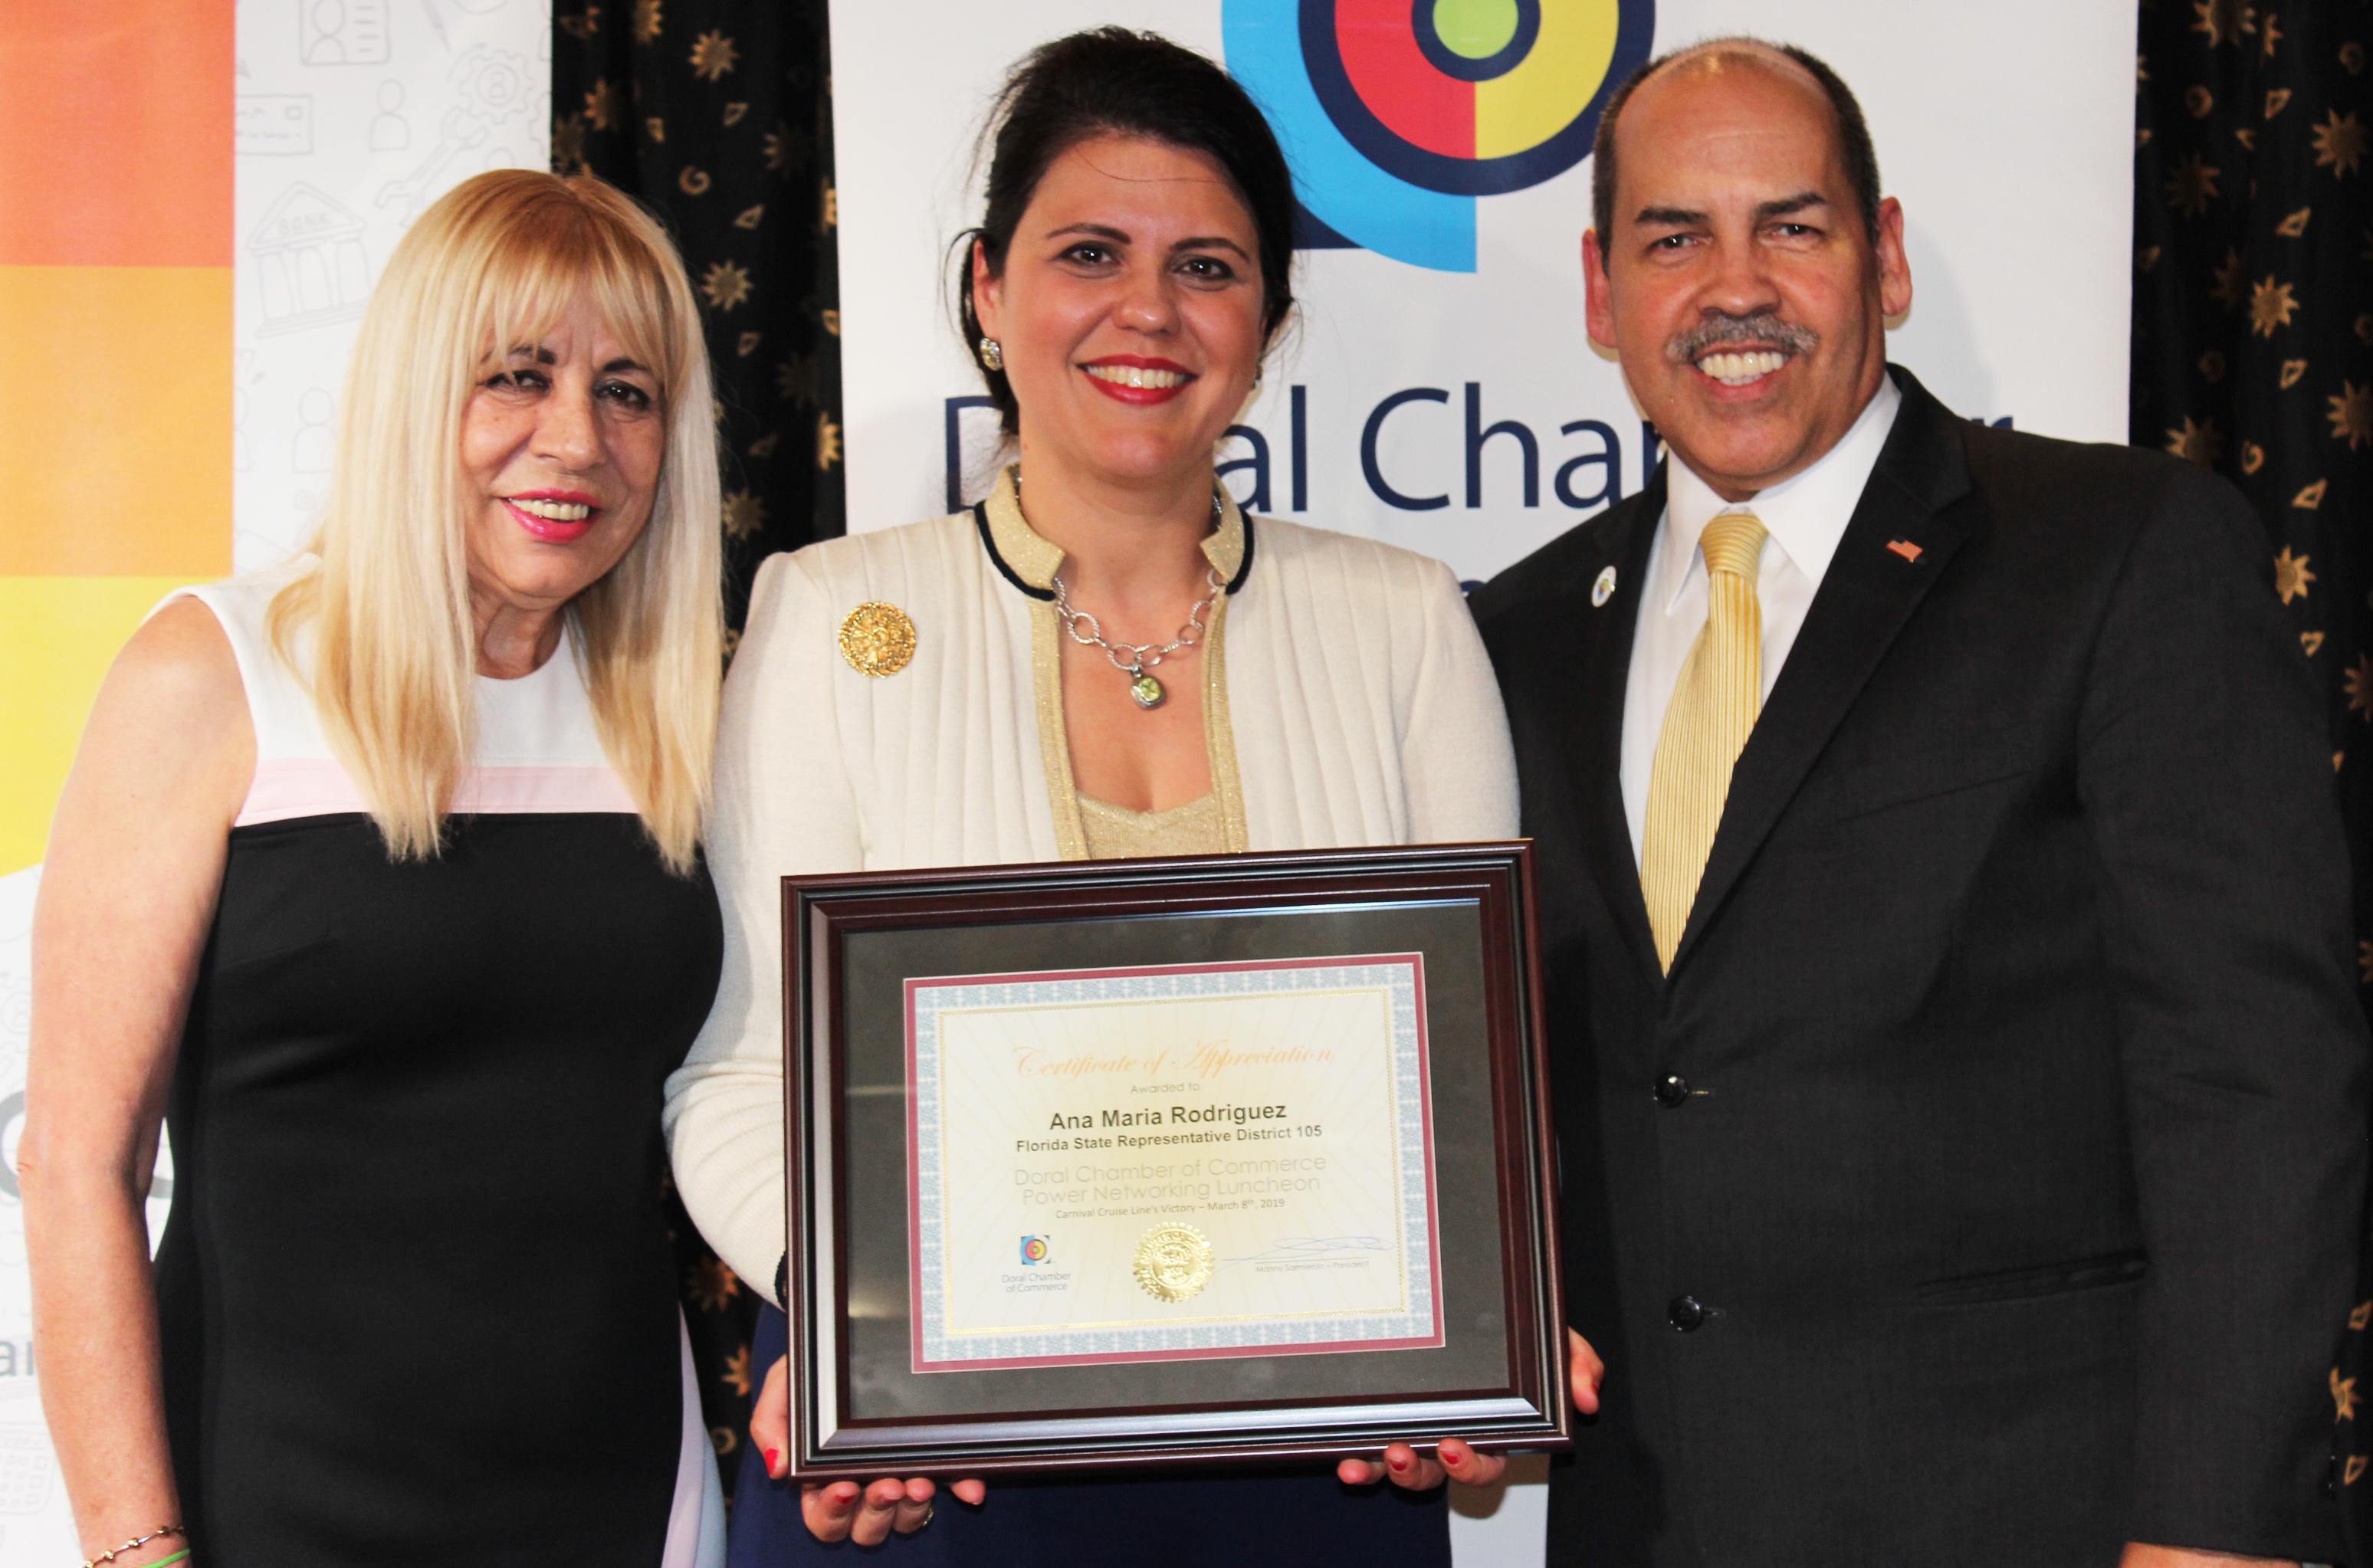 Doral Chamber of Commerce Carnival Cruise Luncheon 2019, Networking Event in Miami, Florida. Manny Sarmiento and Carmen Lopez taking a picture with State Representative Ana Maria Rodriguez.